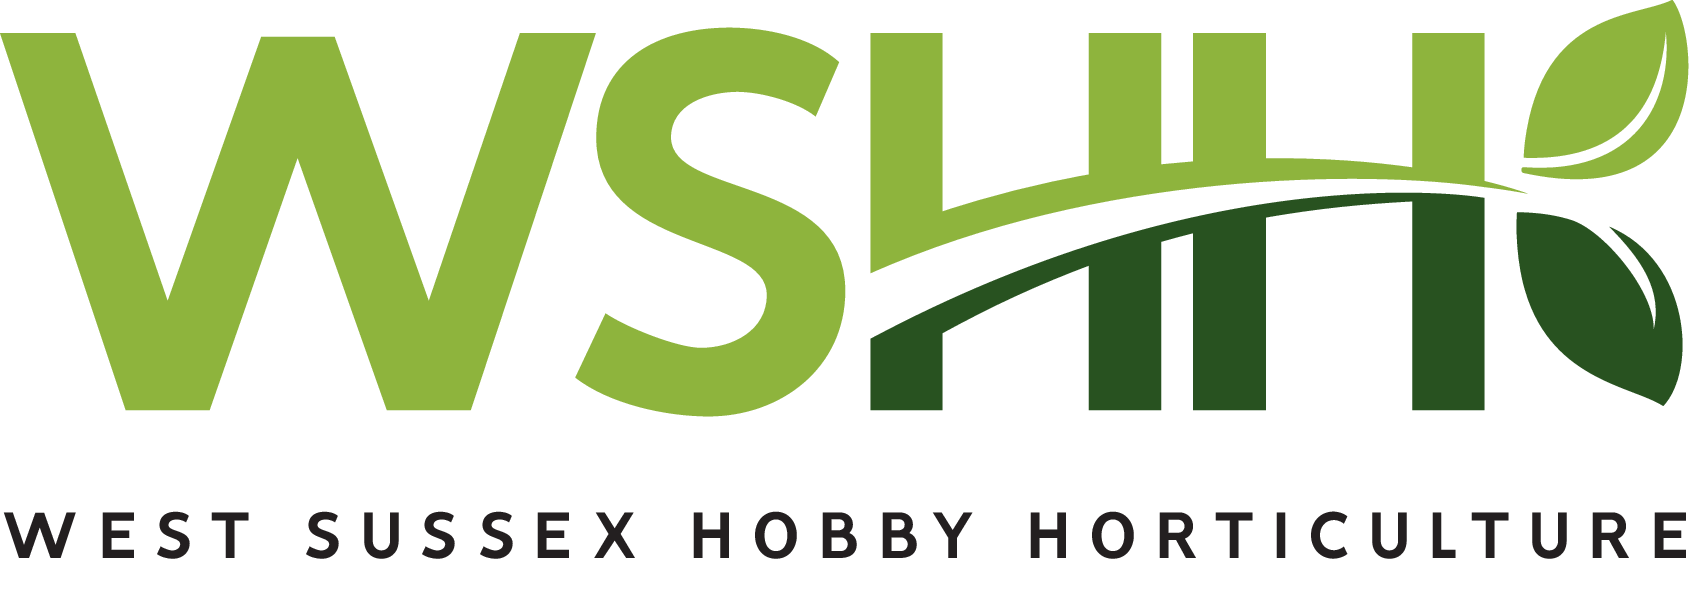 West Sussex Hobby Horticulture